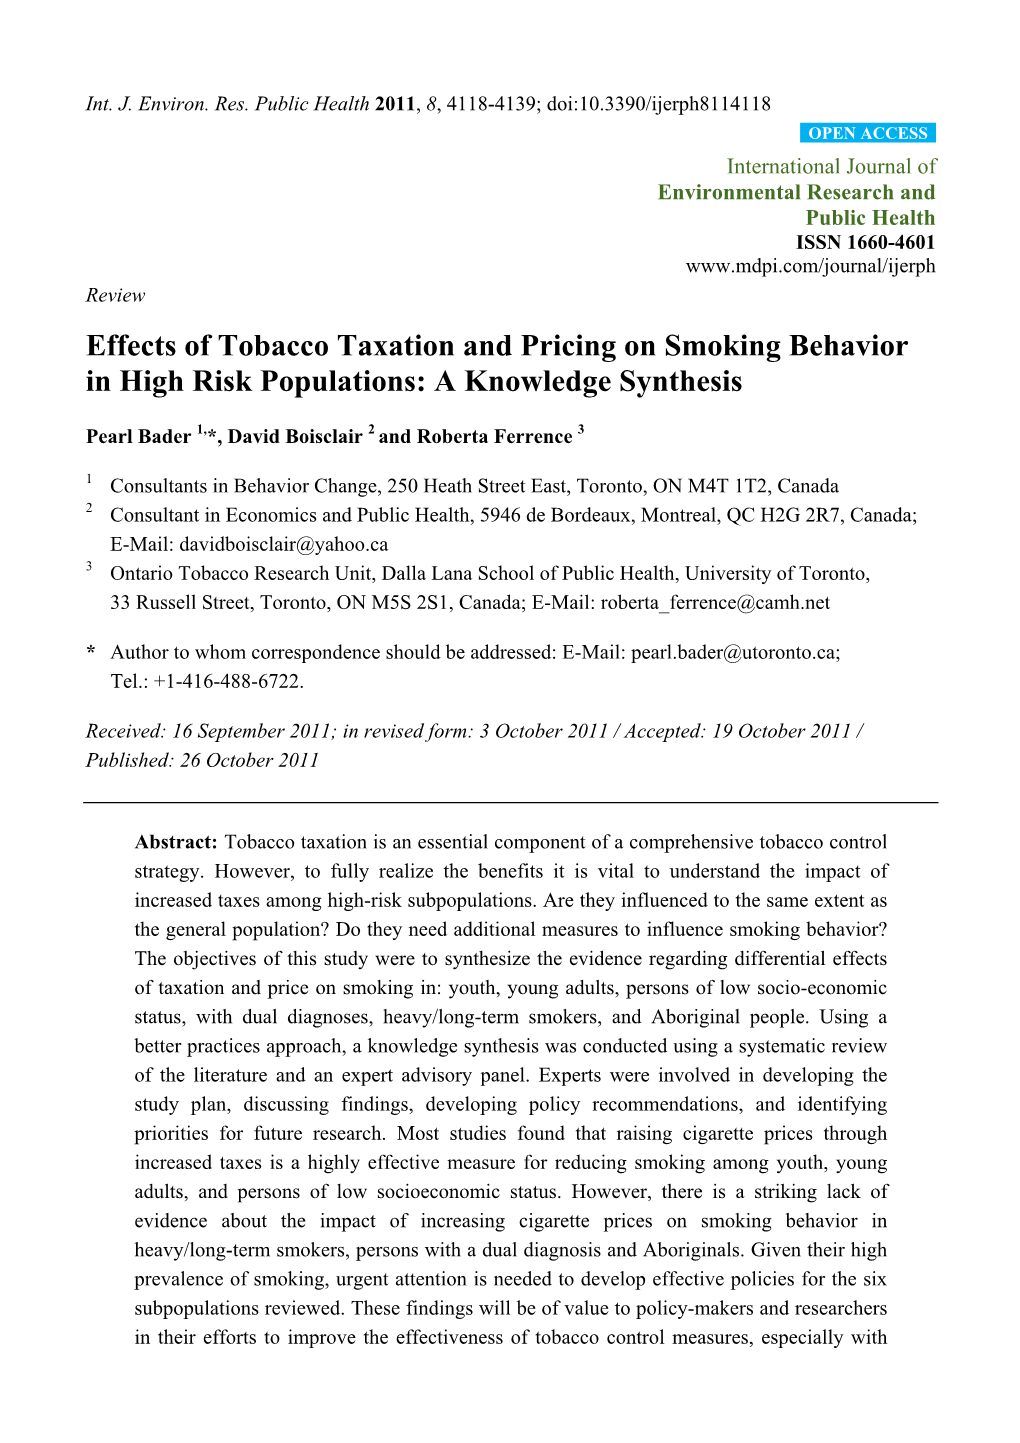 Effects of Tobacco Taxation and Pricing on Smoking Behavior in High Risk Populations: a Knowledge Synthesis